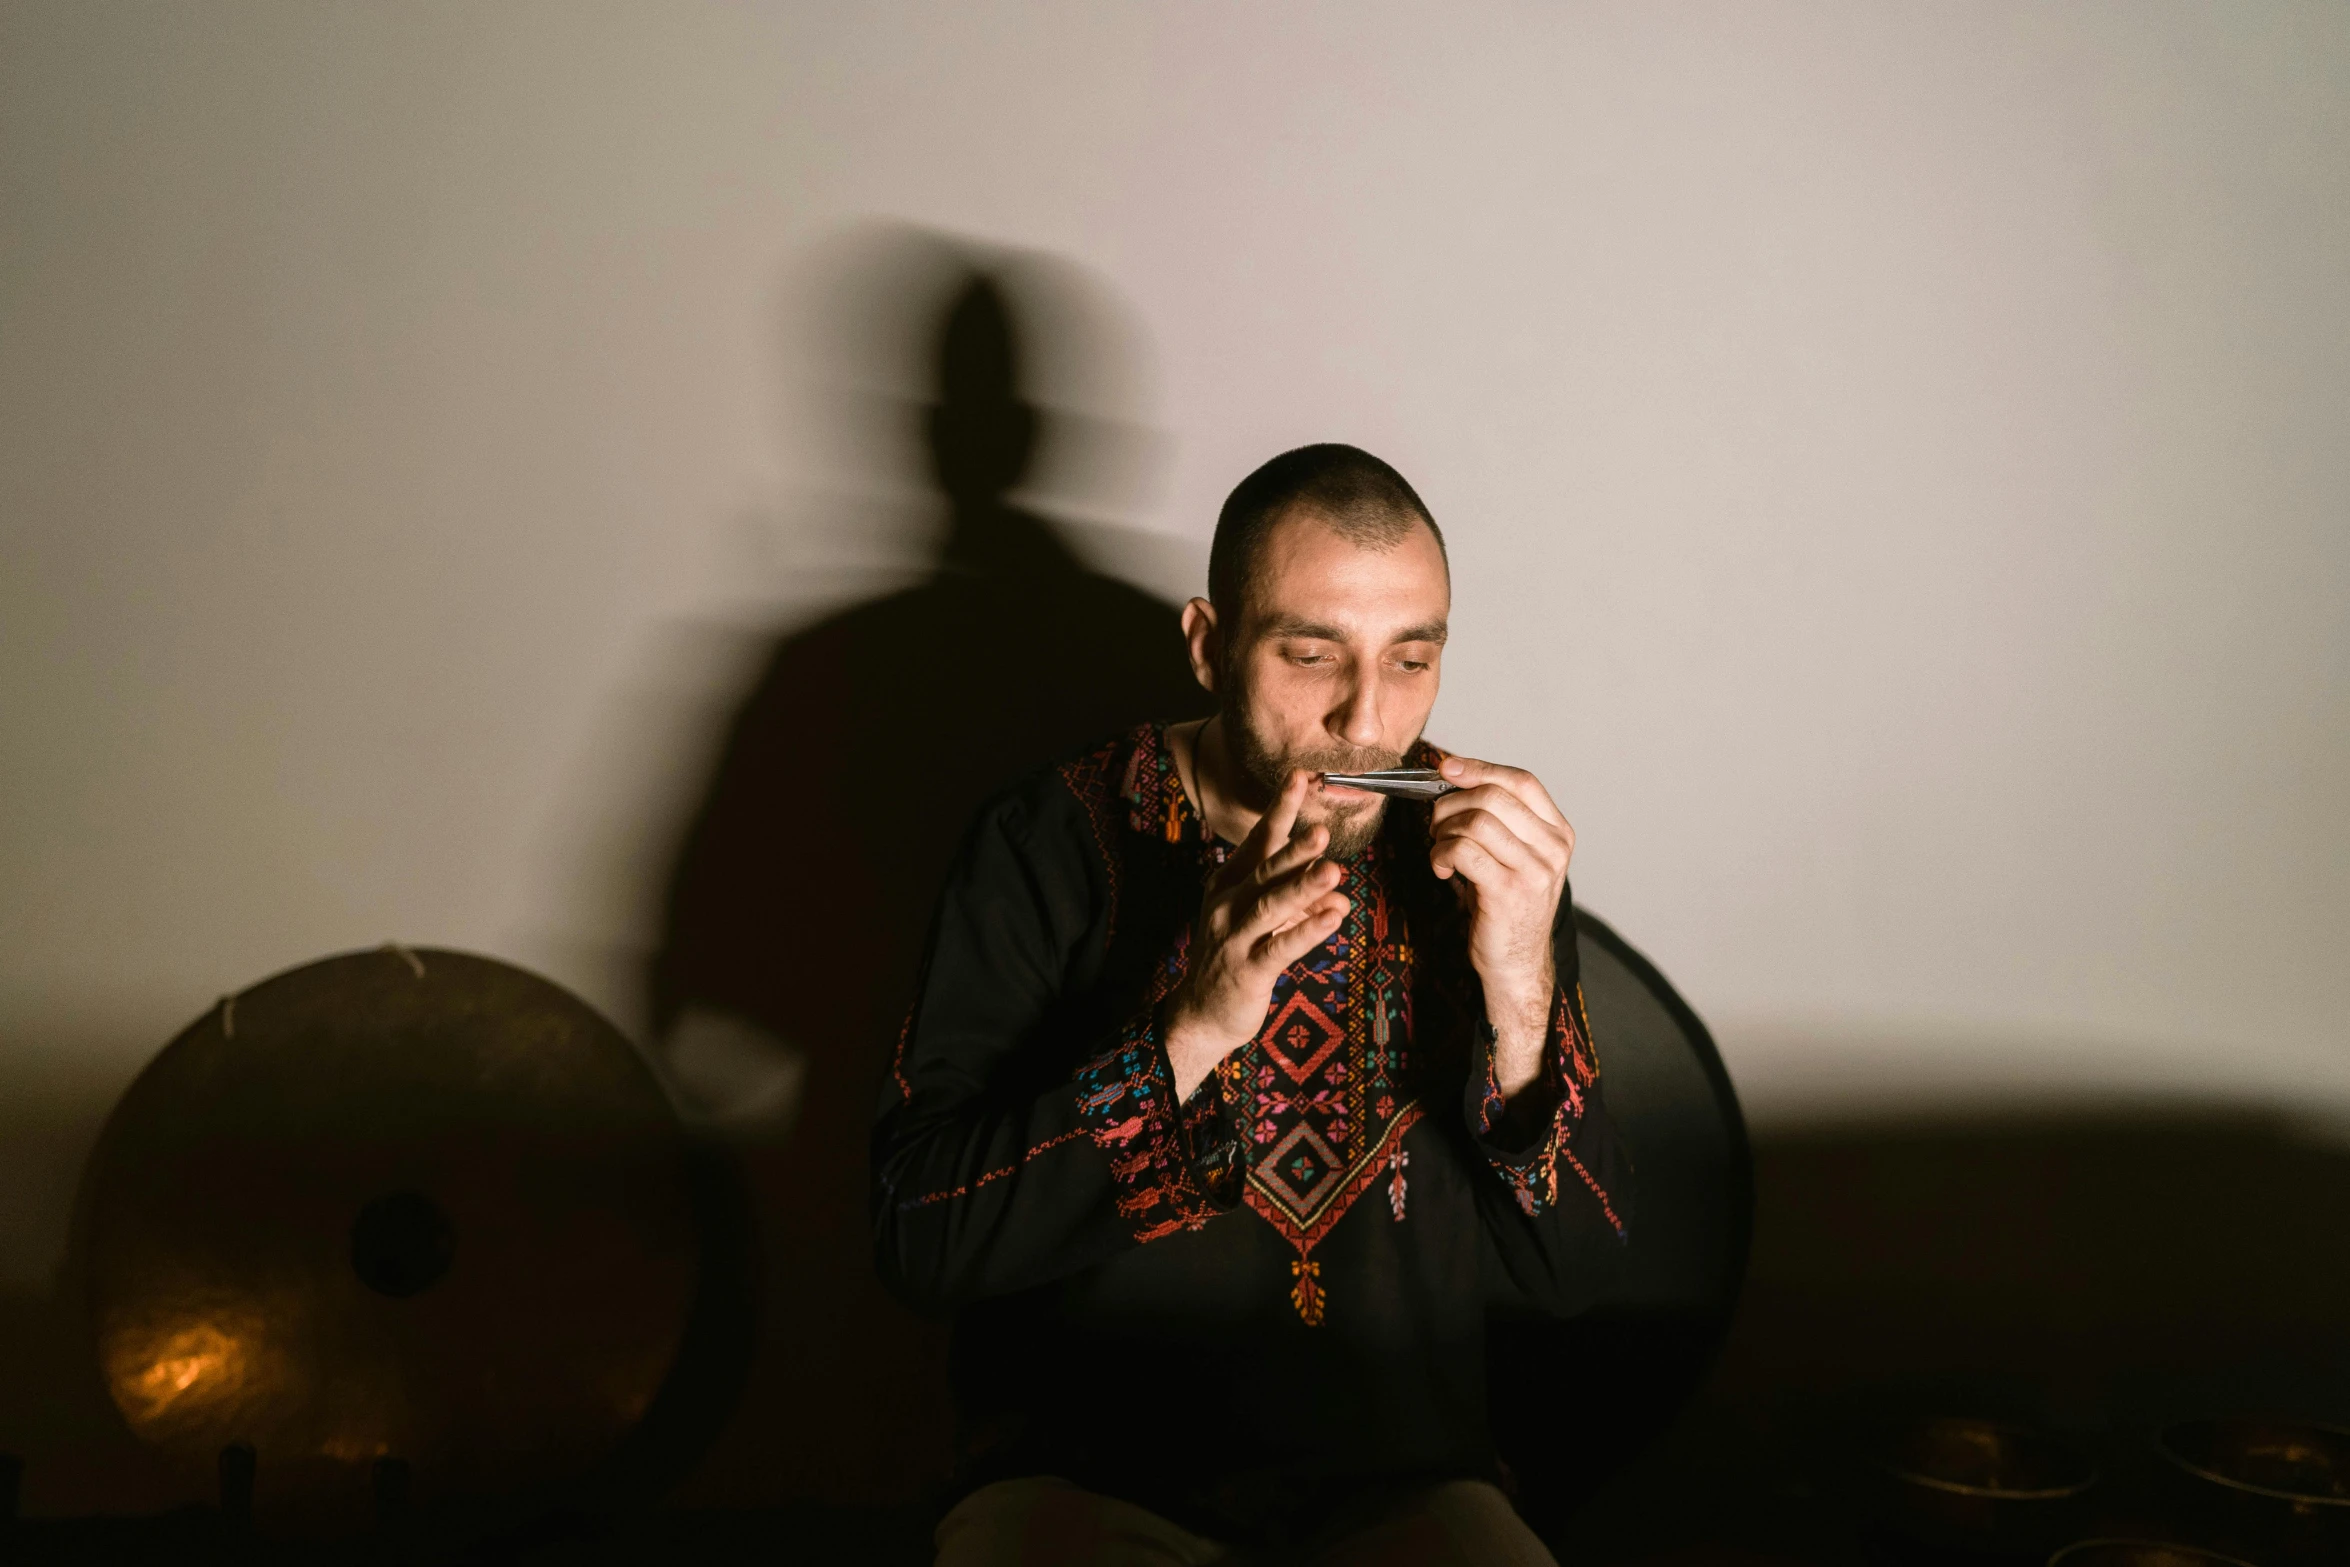 a man sitting on a couch playing a musical instrument, hurufiyya, profile image